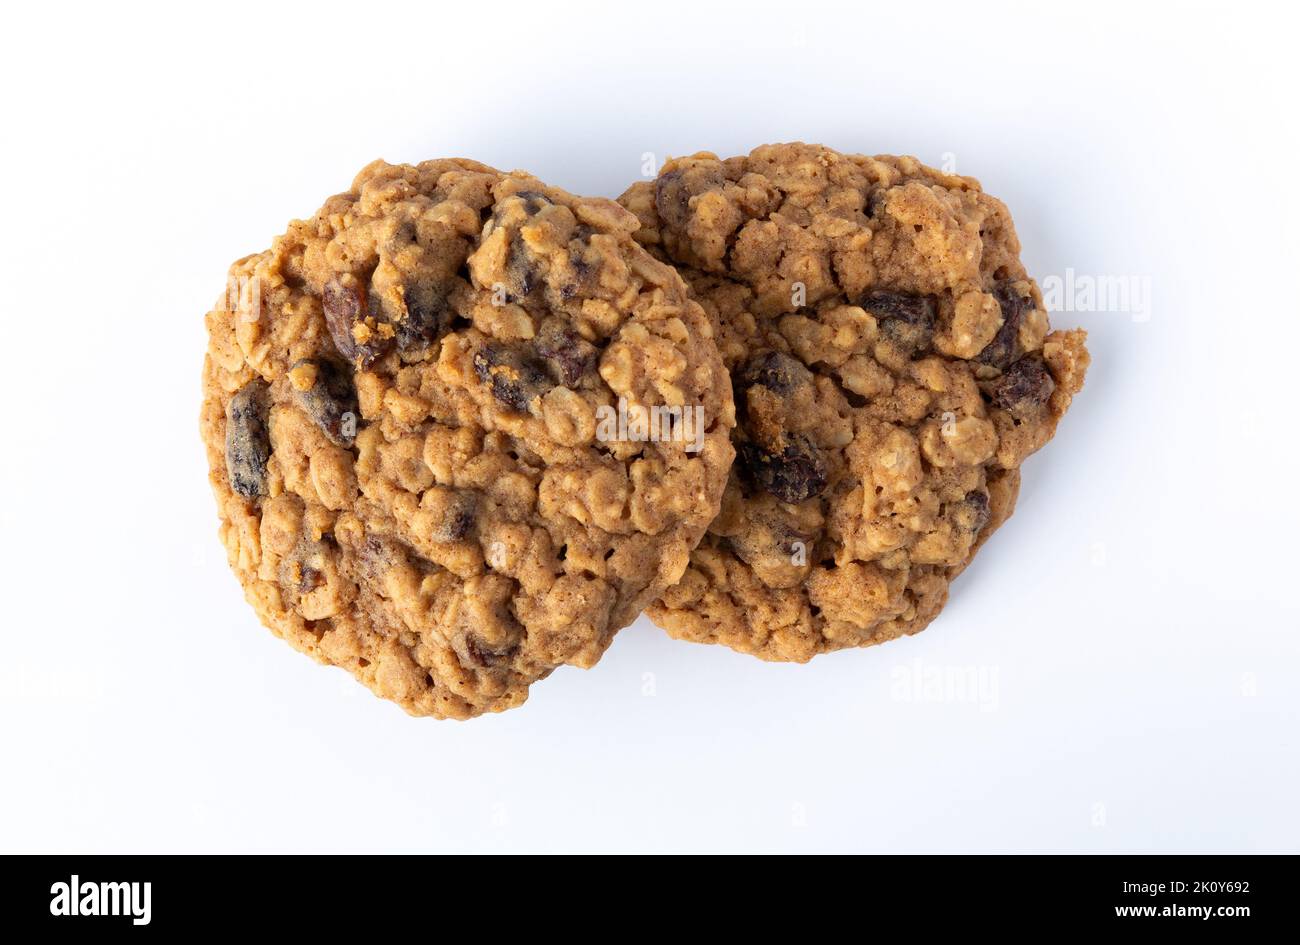 Overhead view of two homemade oatmeal raisin cookies on a white plate. Stock Photo